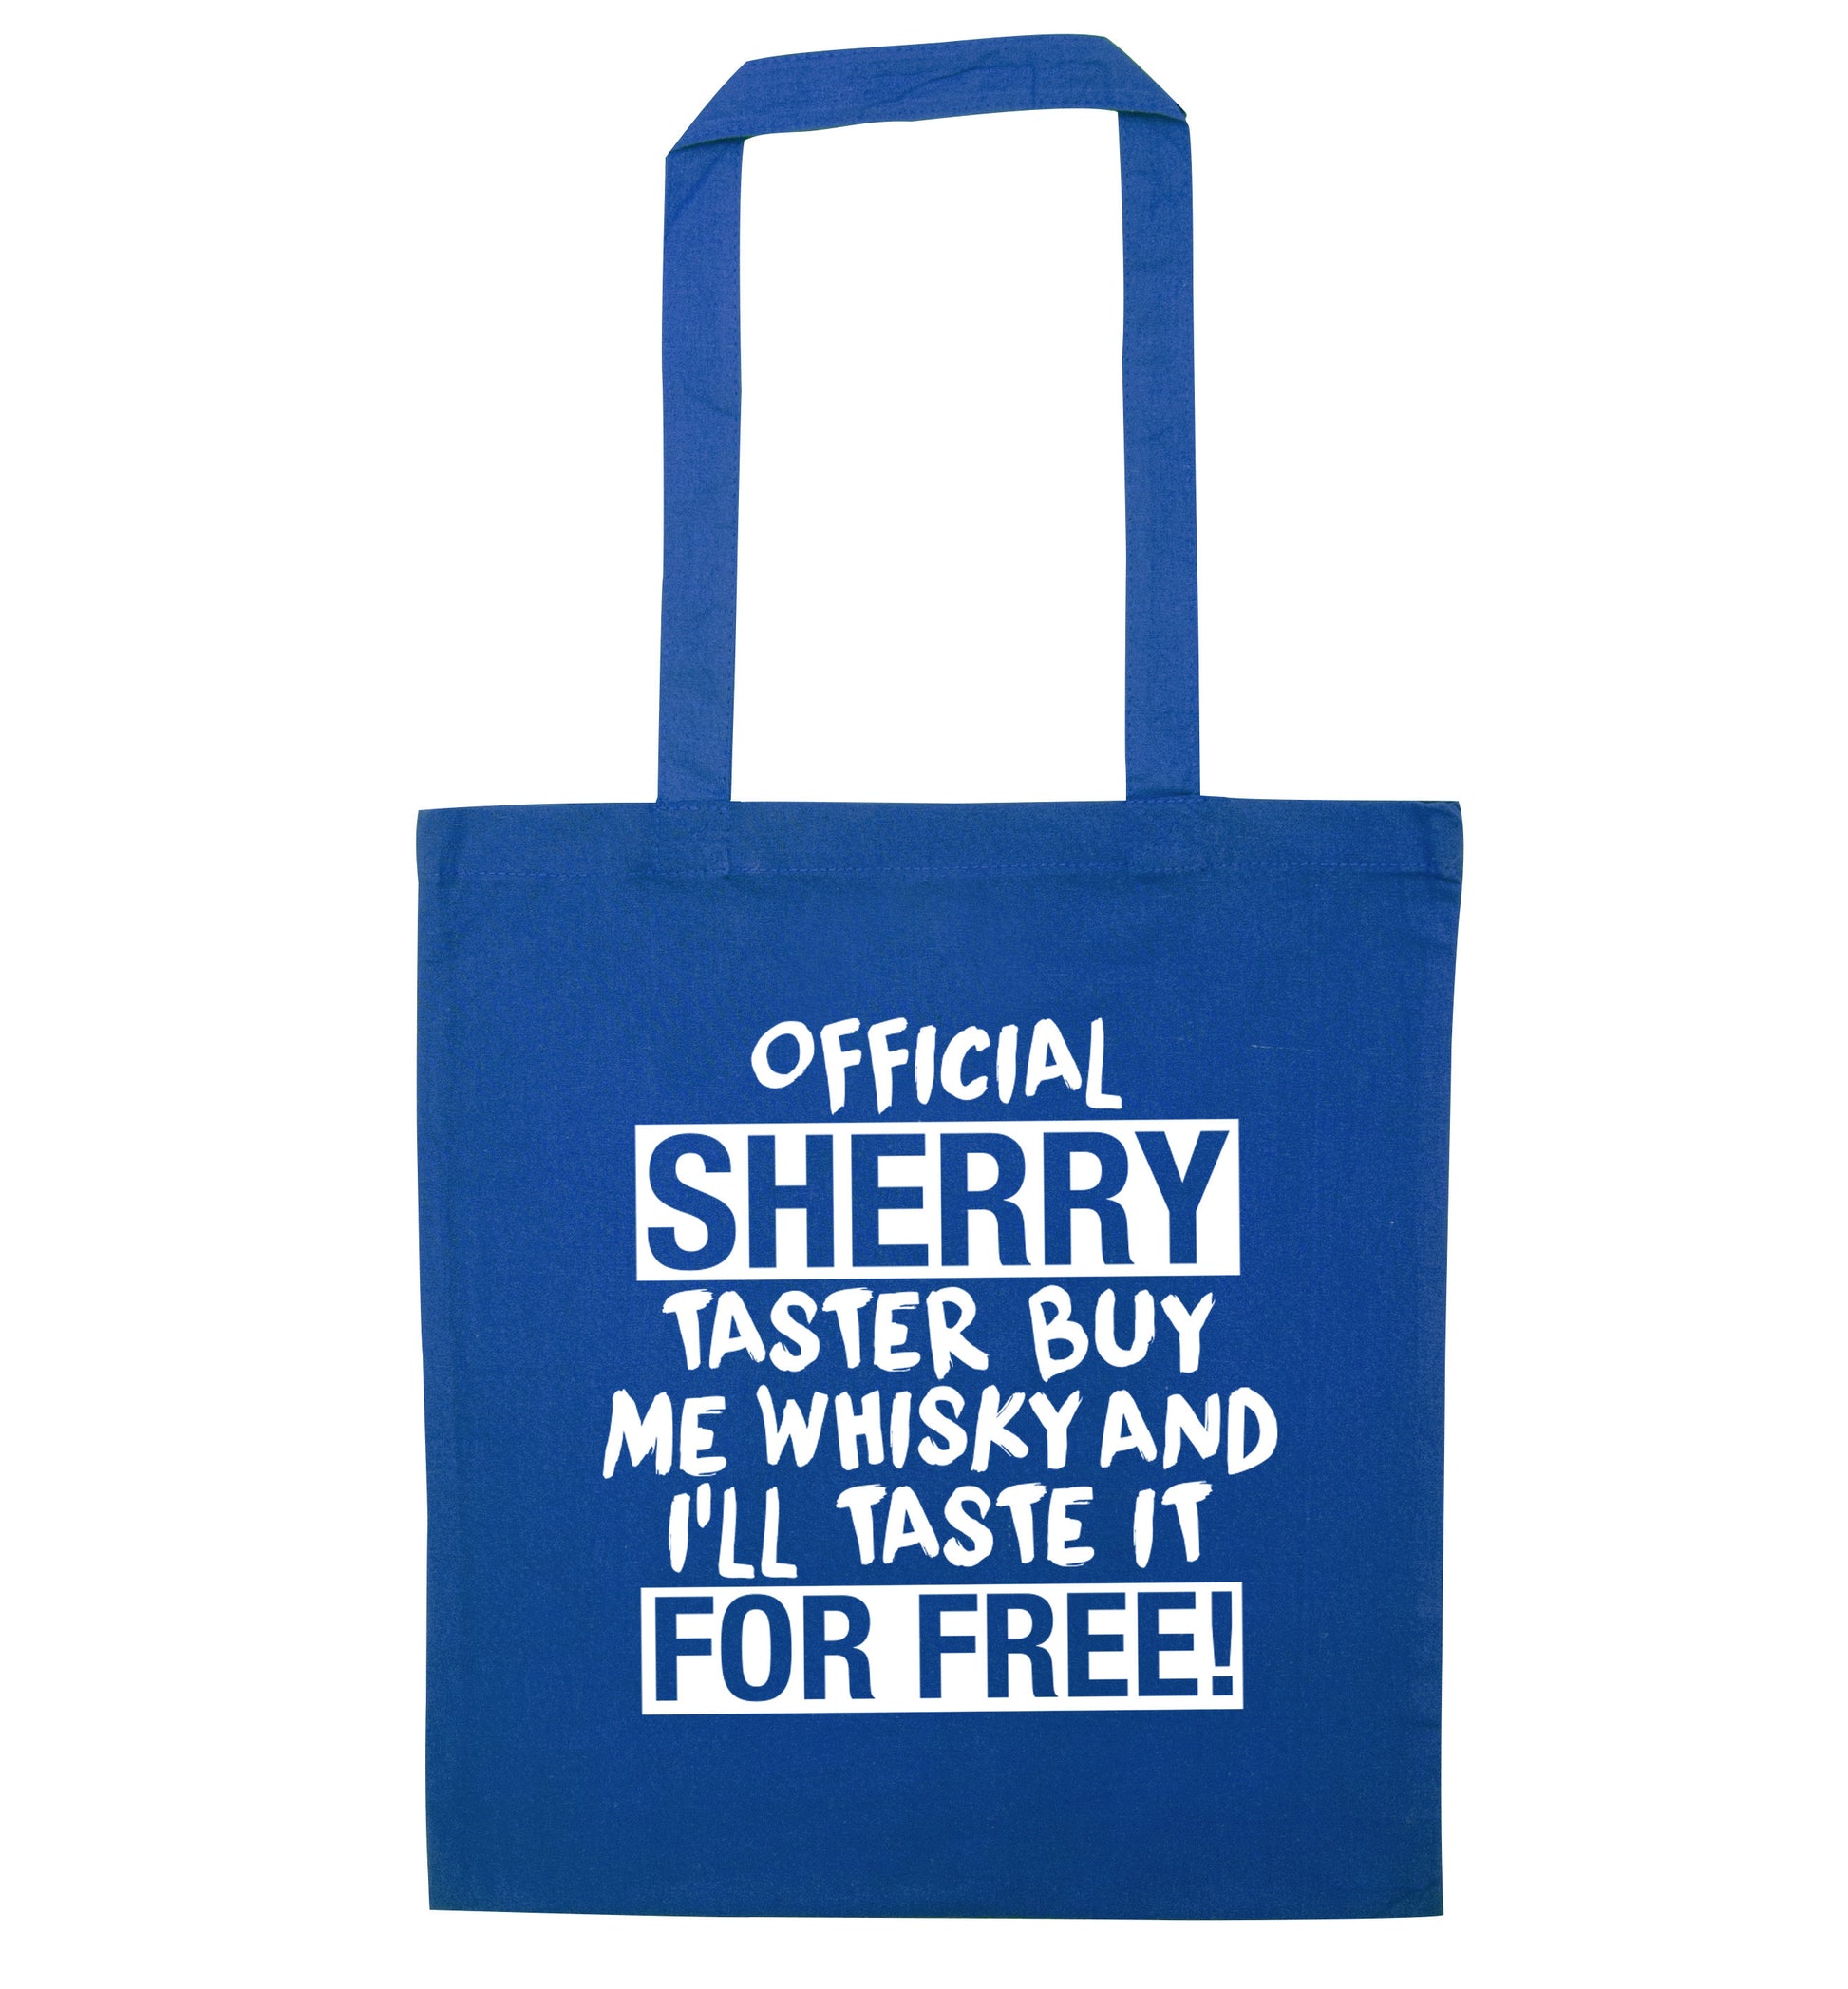 Official sherry taster buy me sherry and I'll taste it for free blue tote bag